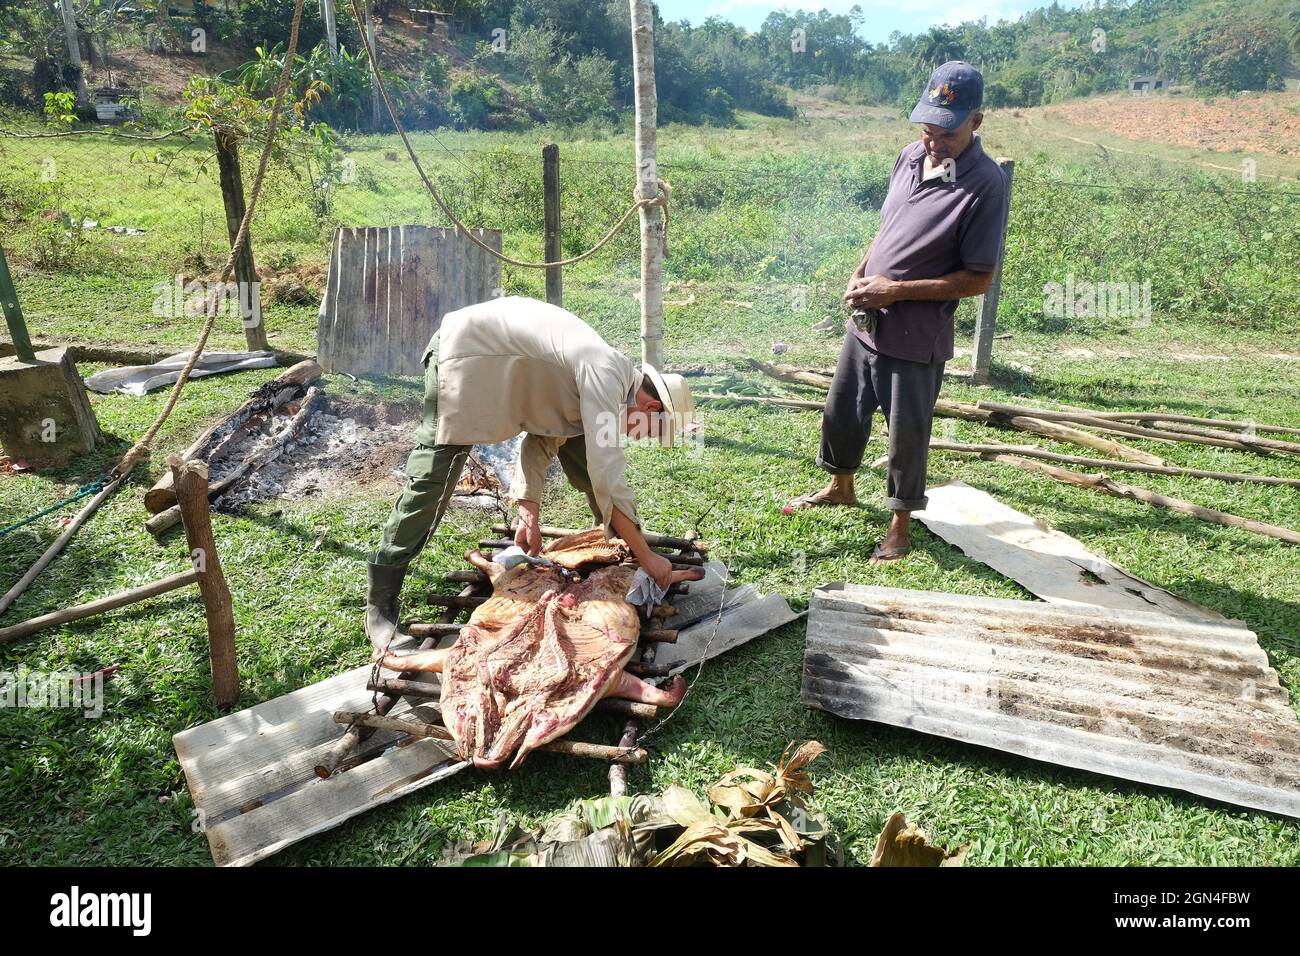 Farmers prepare pig slaughter in the country side, Vinales, Cuba Stock Photo